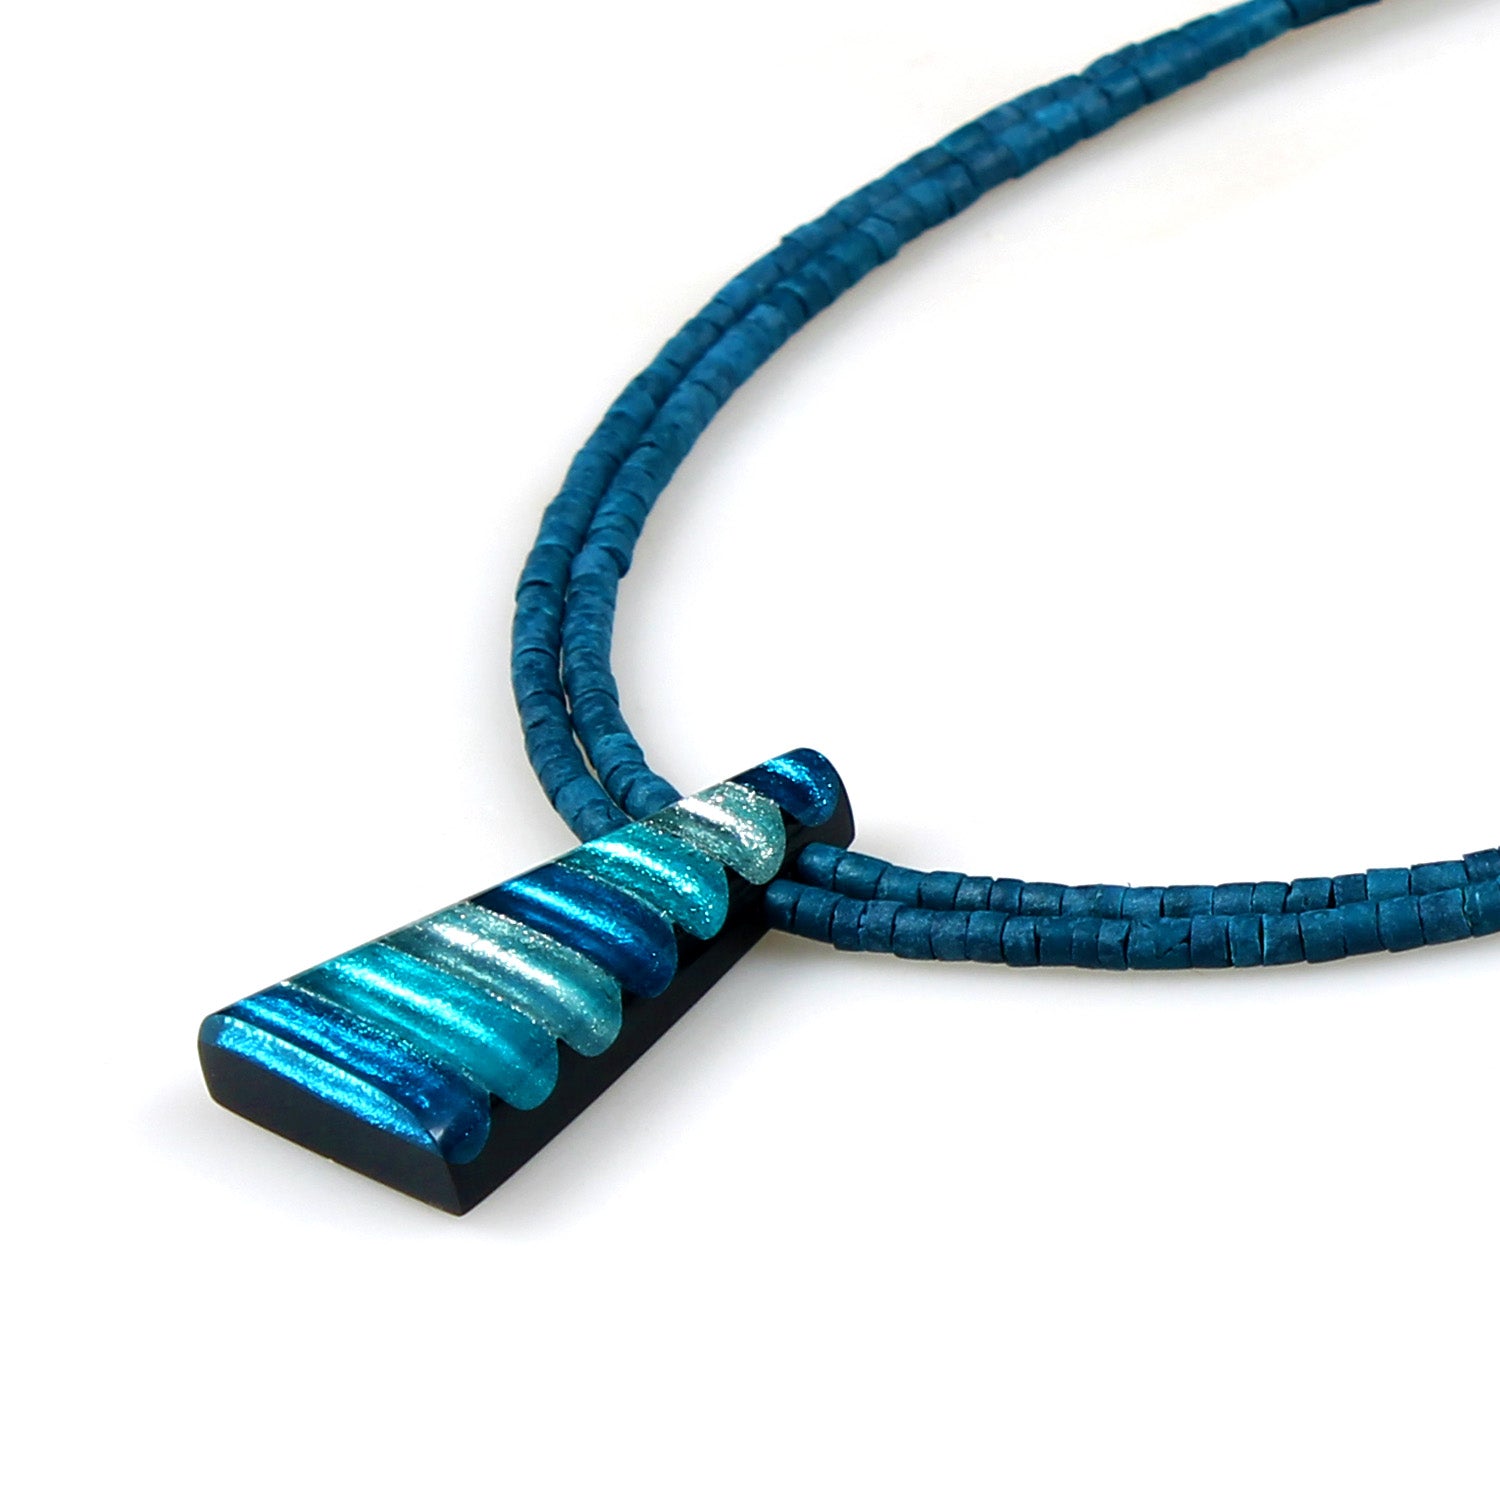 Teal Triangle Stripes Pendant on Coco